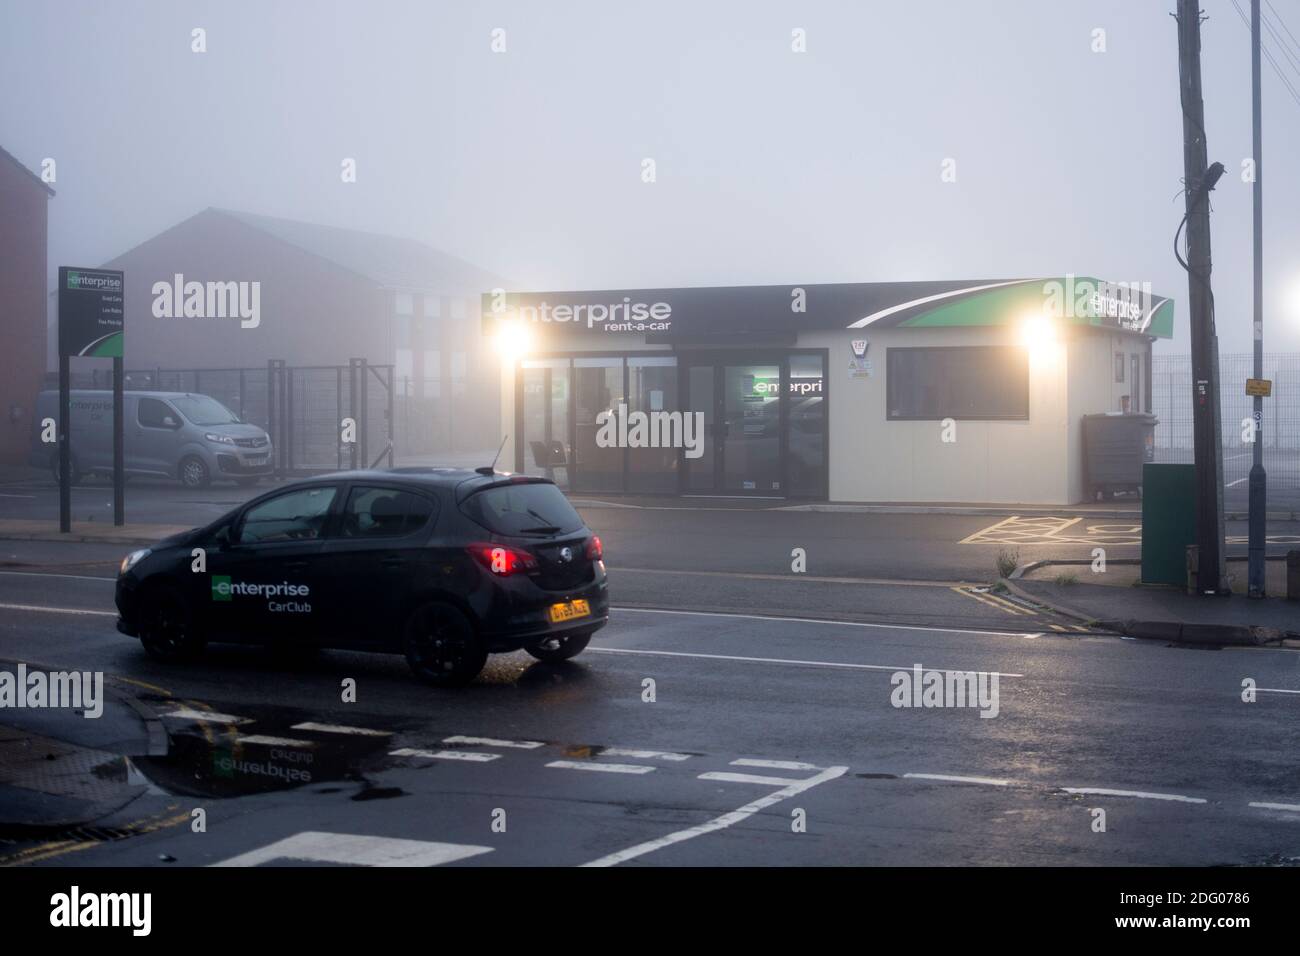 Enterprise rent-a-car office on a foggy winter`s day, Warwick, UK Stock Photo